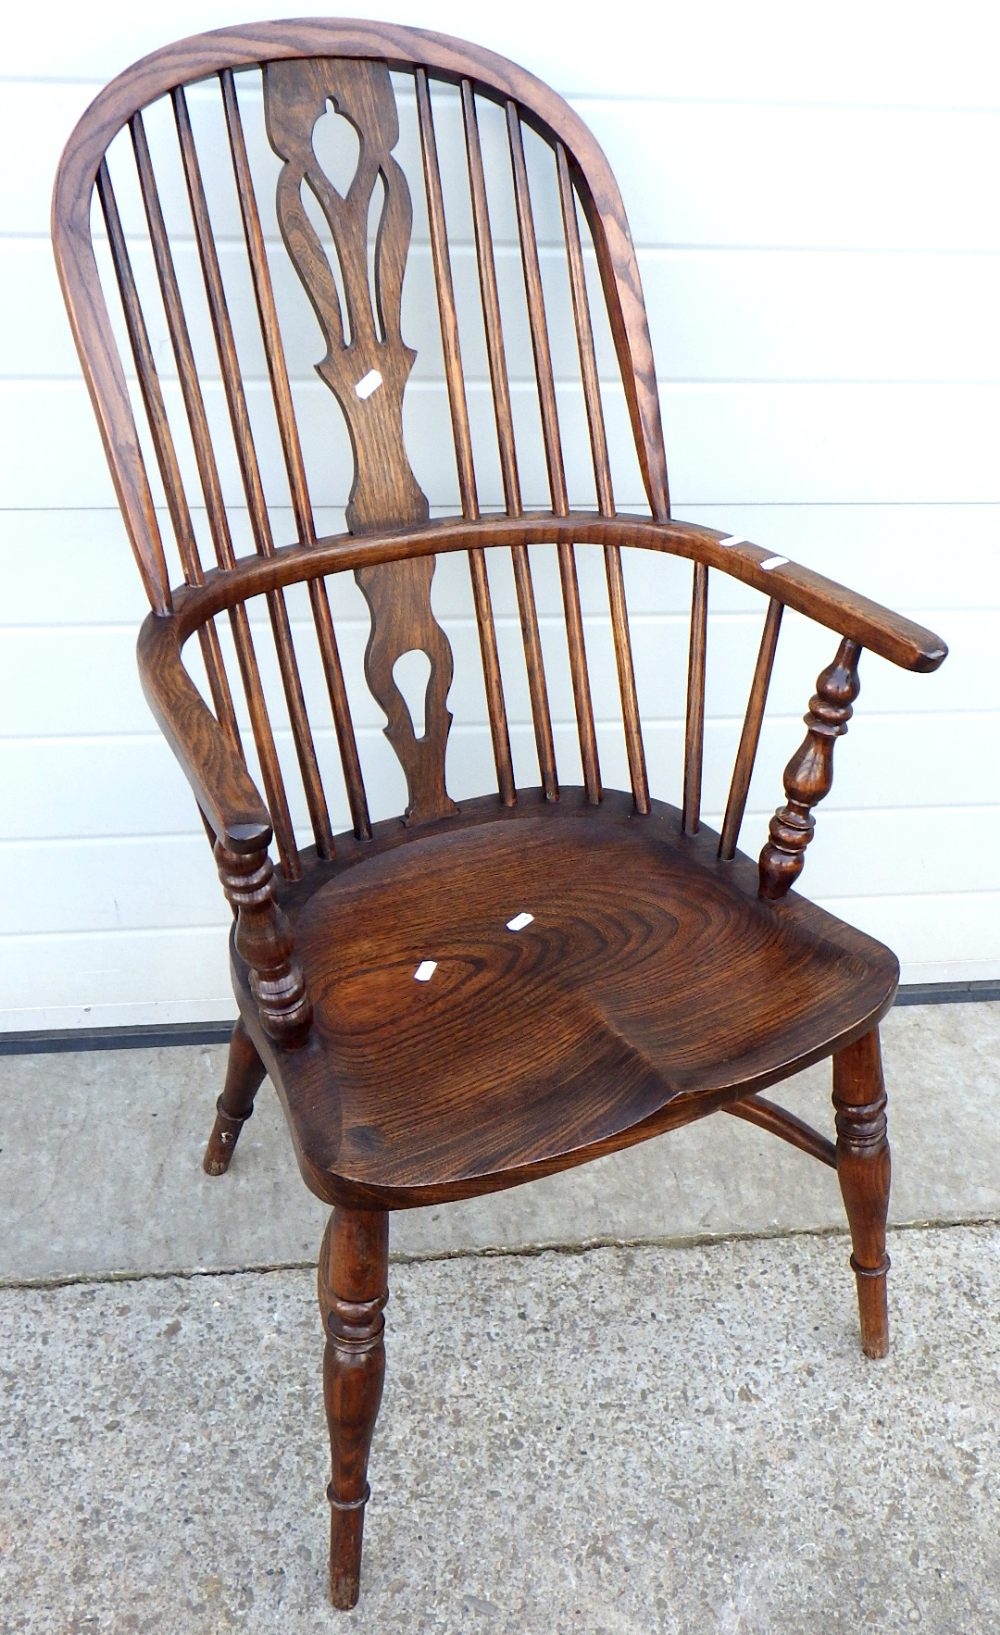 A reproduction Windsor chair with crinoline stretcher